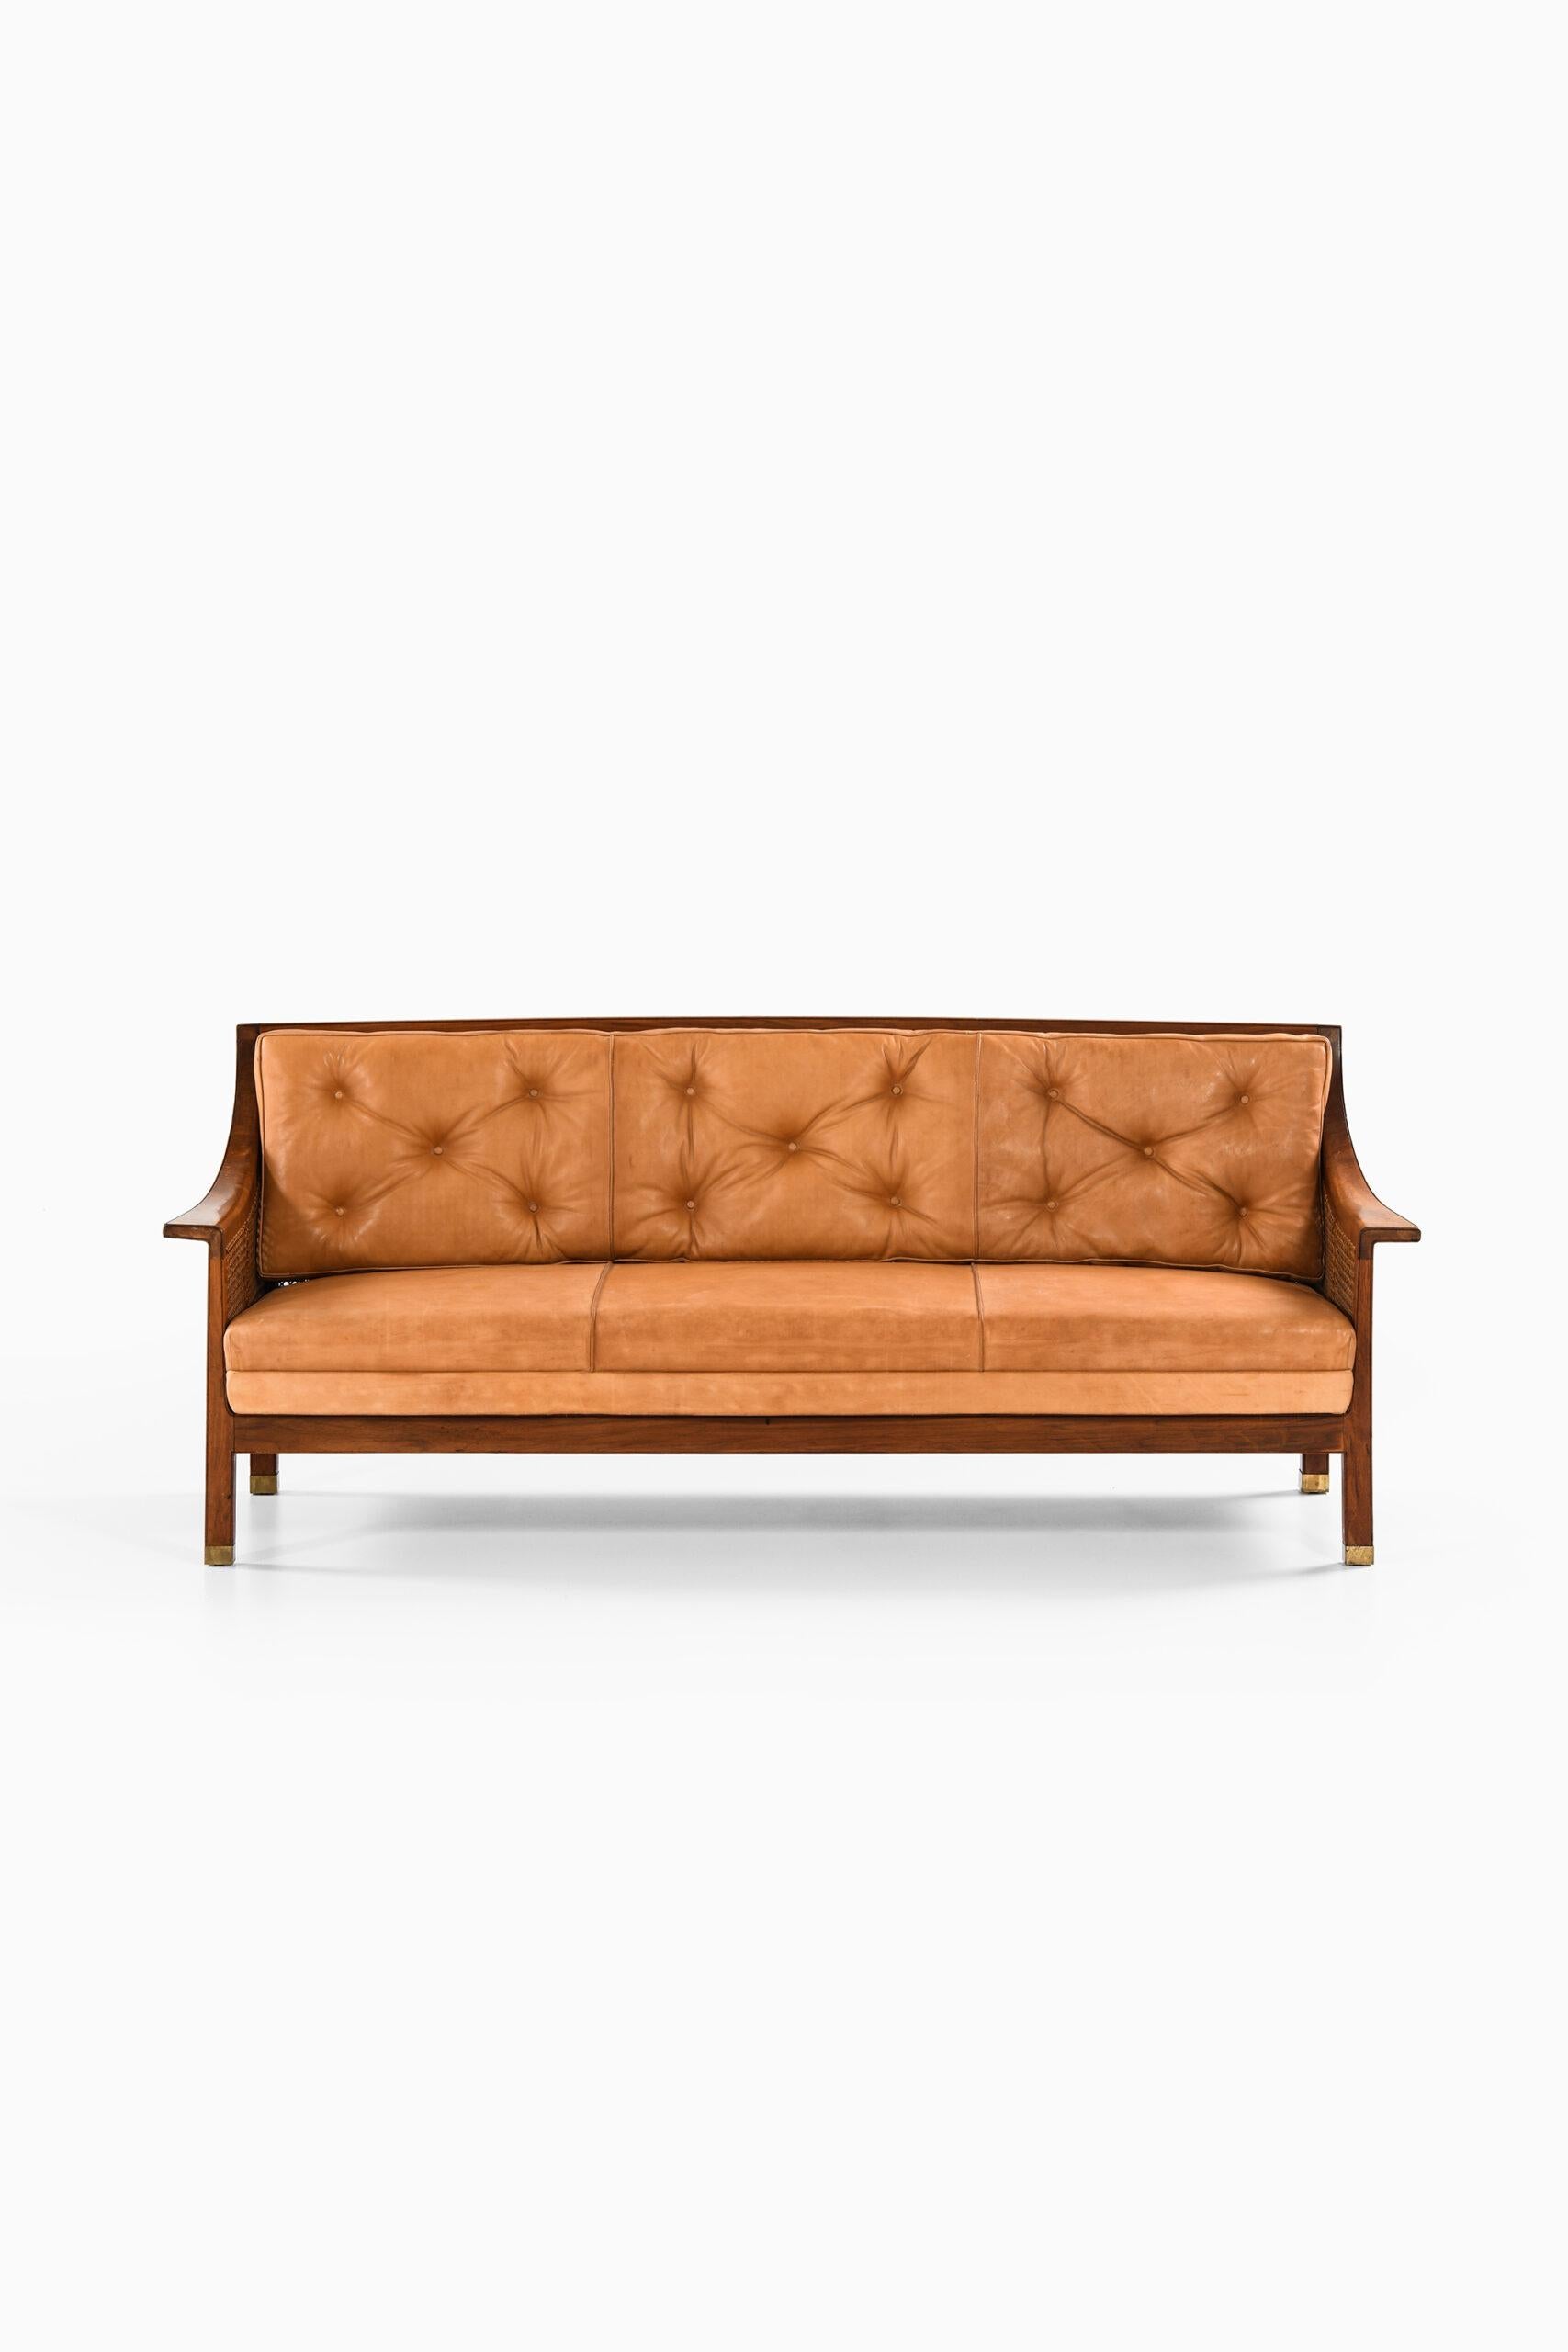 Unique freestanding sofa designed by Arne Jacobsen. Produced by cabinetmaker Otto Meyer in Denmark.

Provenance: 
Publisher Fergo, hence by descent in the family. The sofa was designed 17 February 1927 as part of the furnishing for a library room